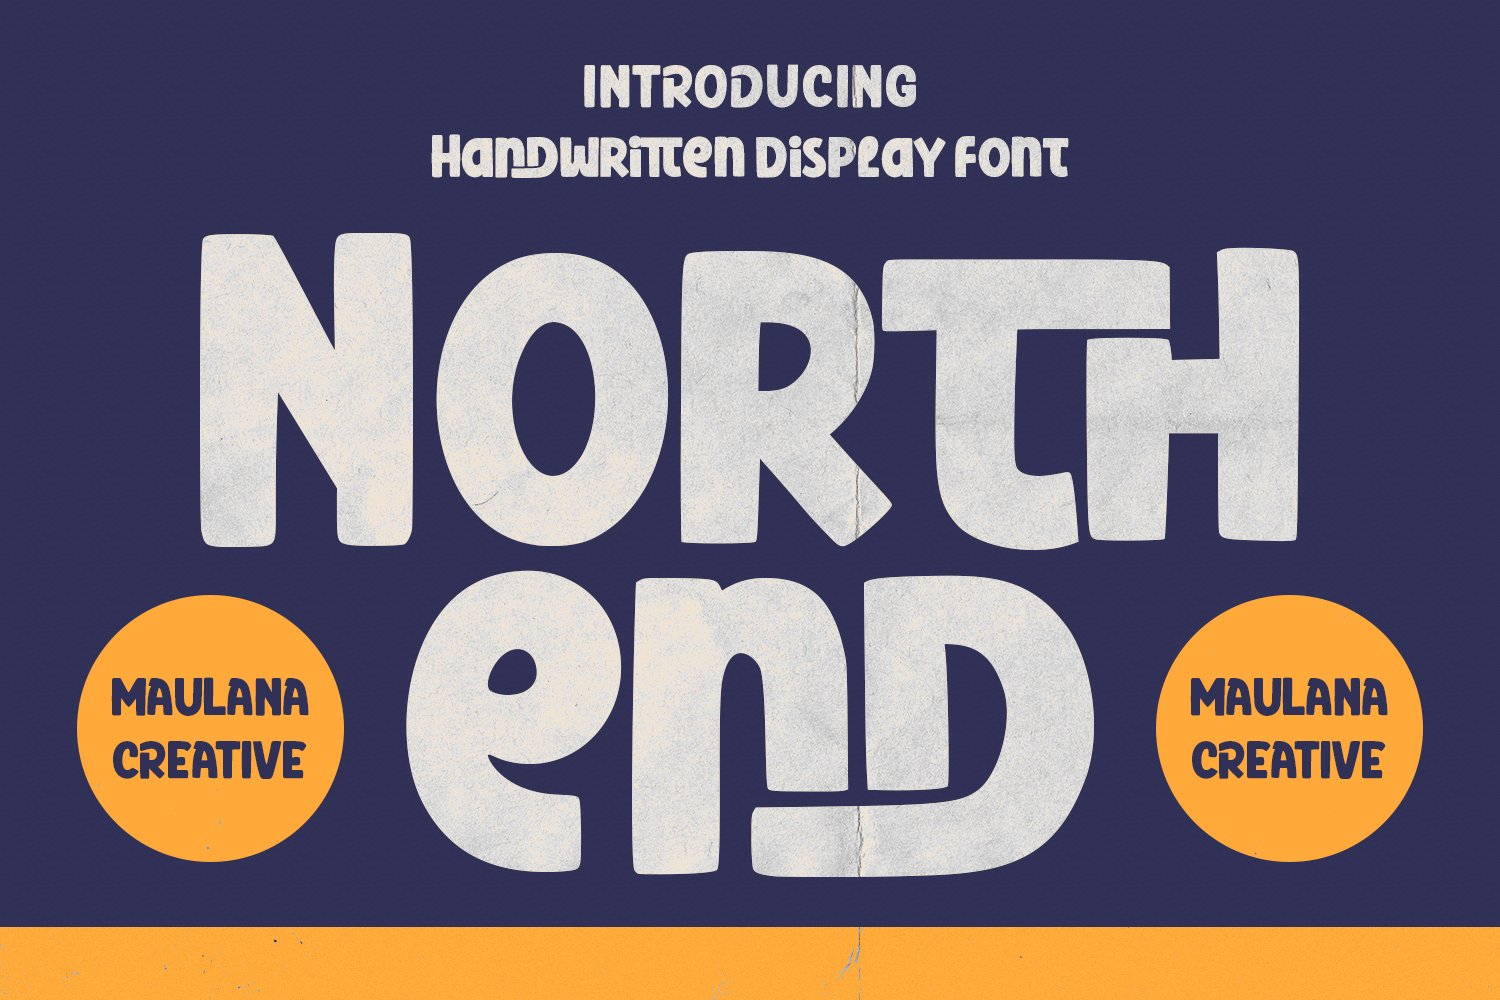 Northend Handwritten Display Font cover image.